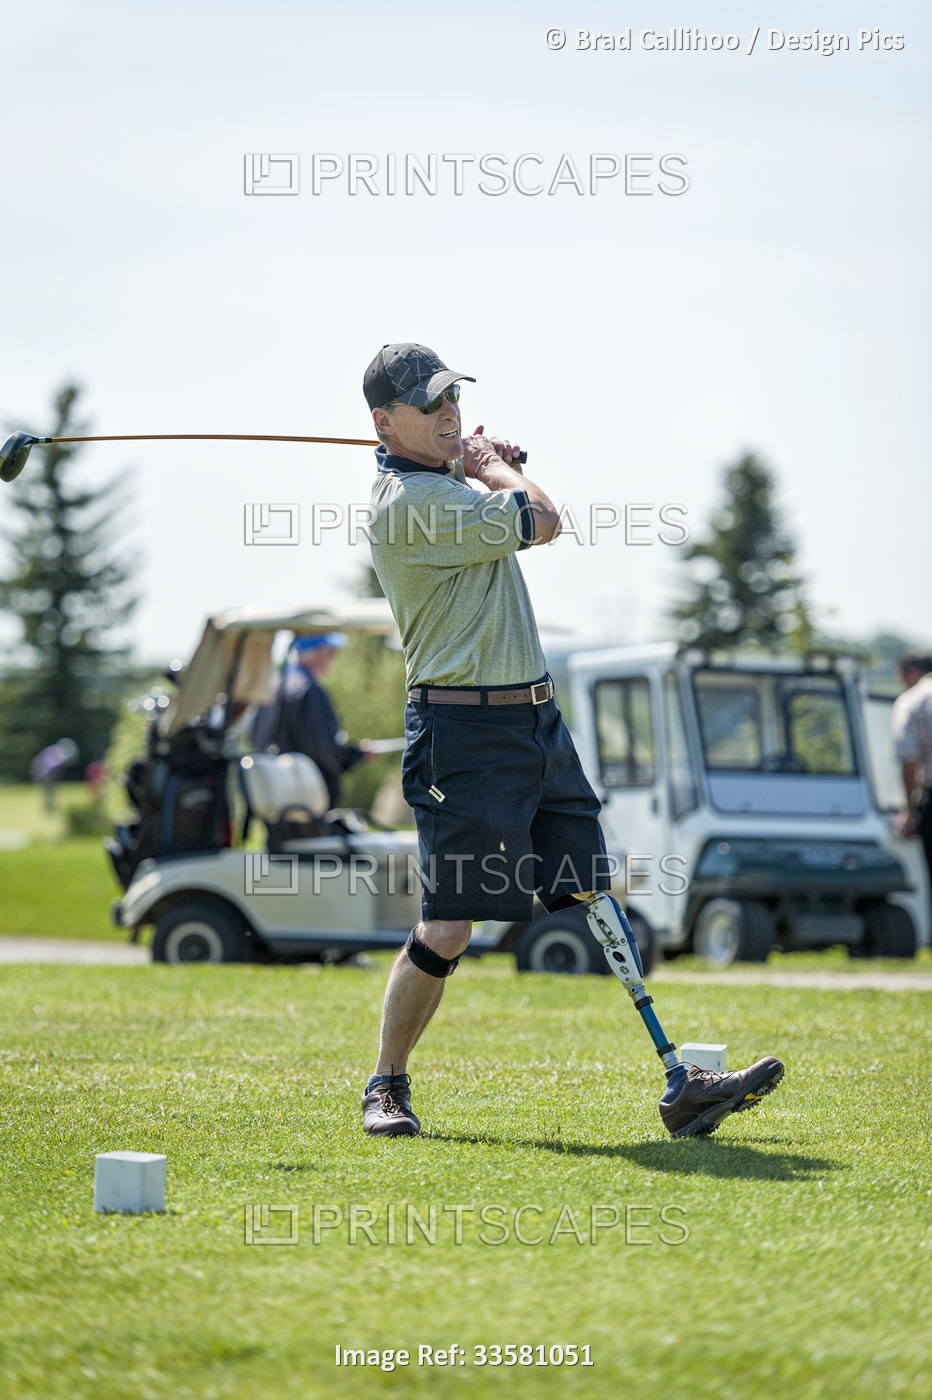 Amputee with leg prosthesis driving the ball on the golf course; Okotoks, ...